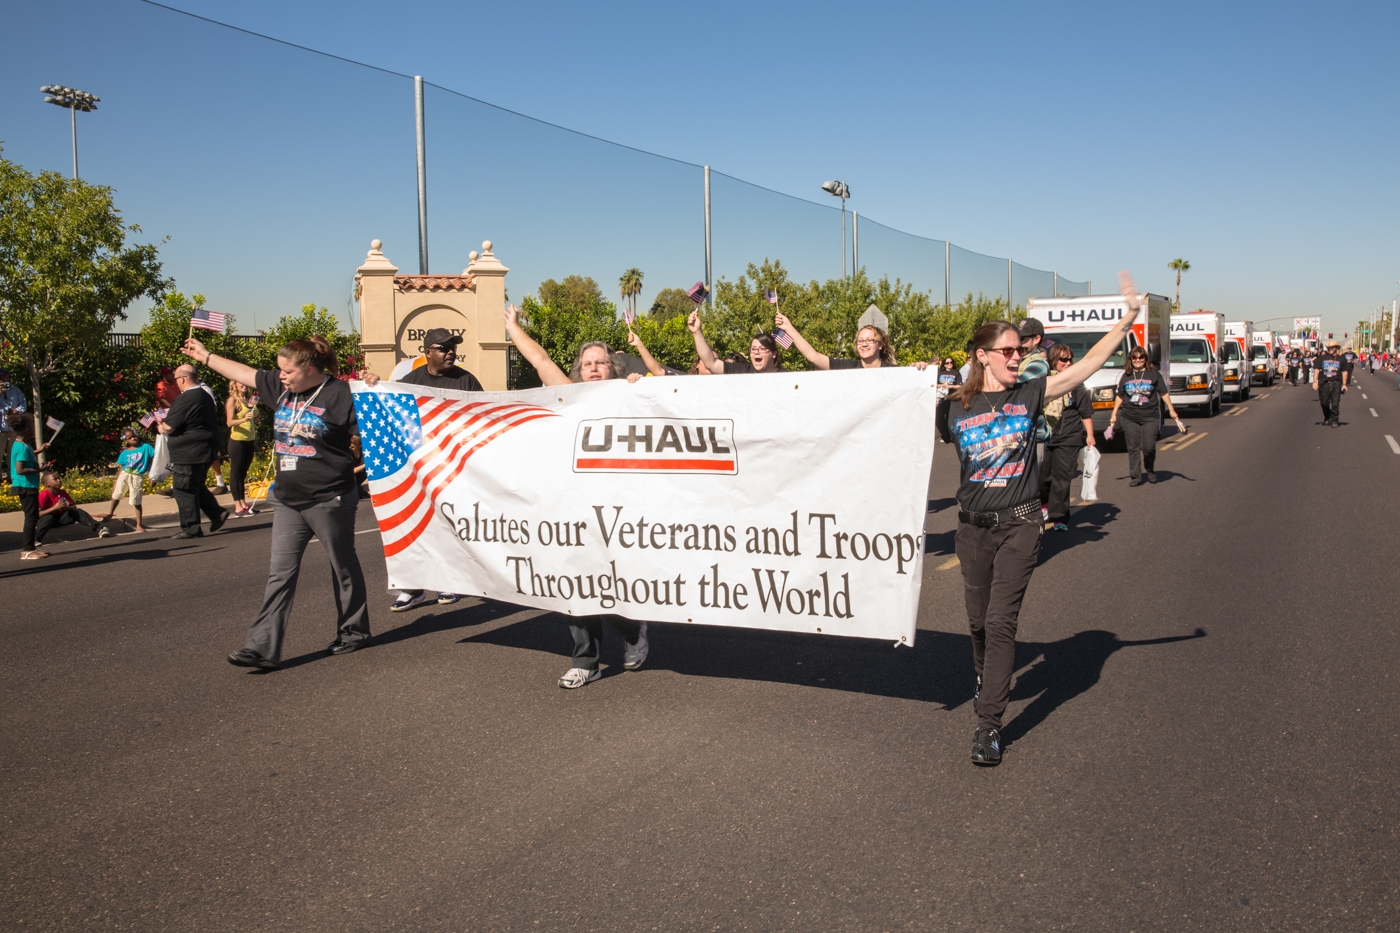 U-Haul has proudly signed on as a $20,000 sponsor to support the Freedom Team at the 2018 Hope & Possibility race – a four-mile, fan-favorite event that New York City is hosting for the 16th year.